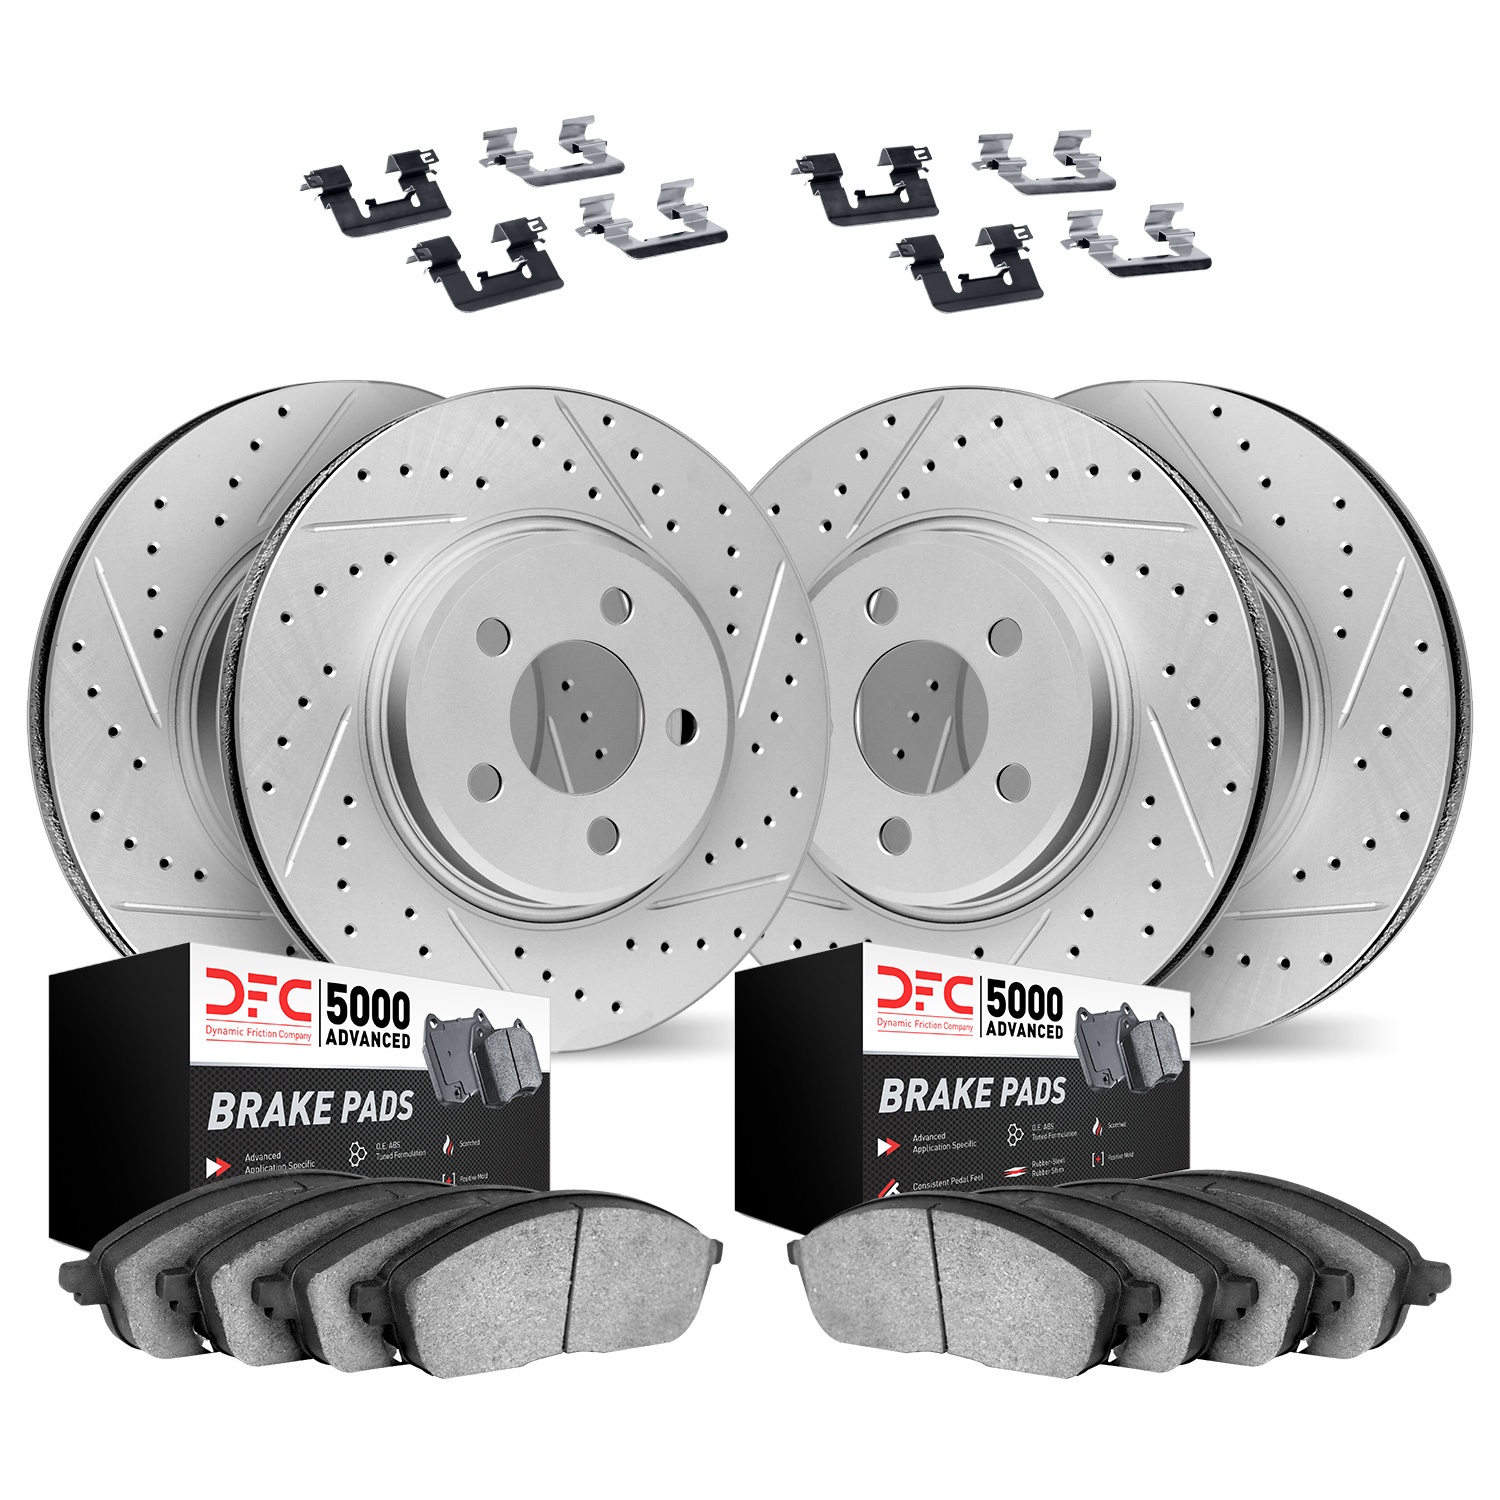 2514-31052 Geoperformance Drilled/Slotted Rotors w/5000 Advanced Brake Pads Kit & Hardware, 2007-2015 BMW, Position: Front and R